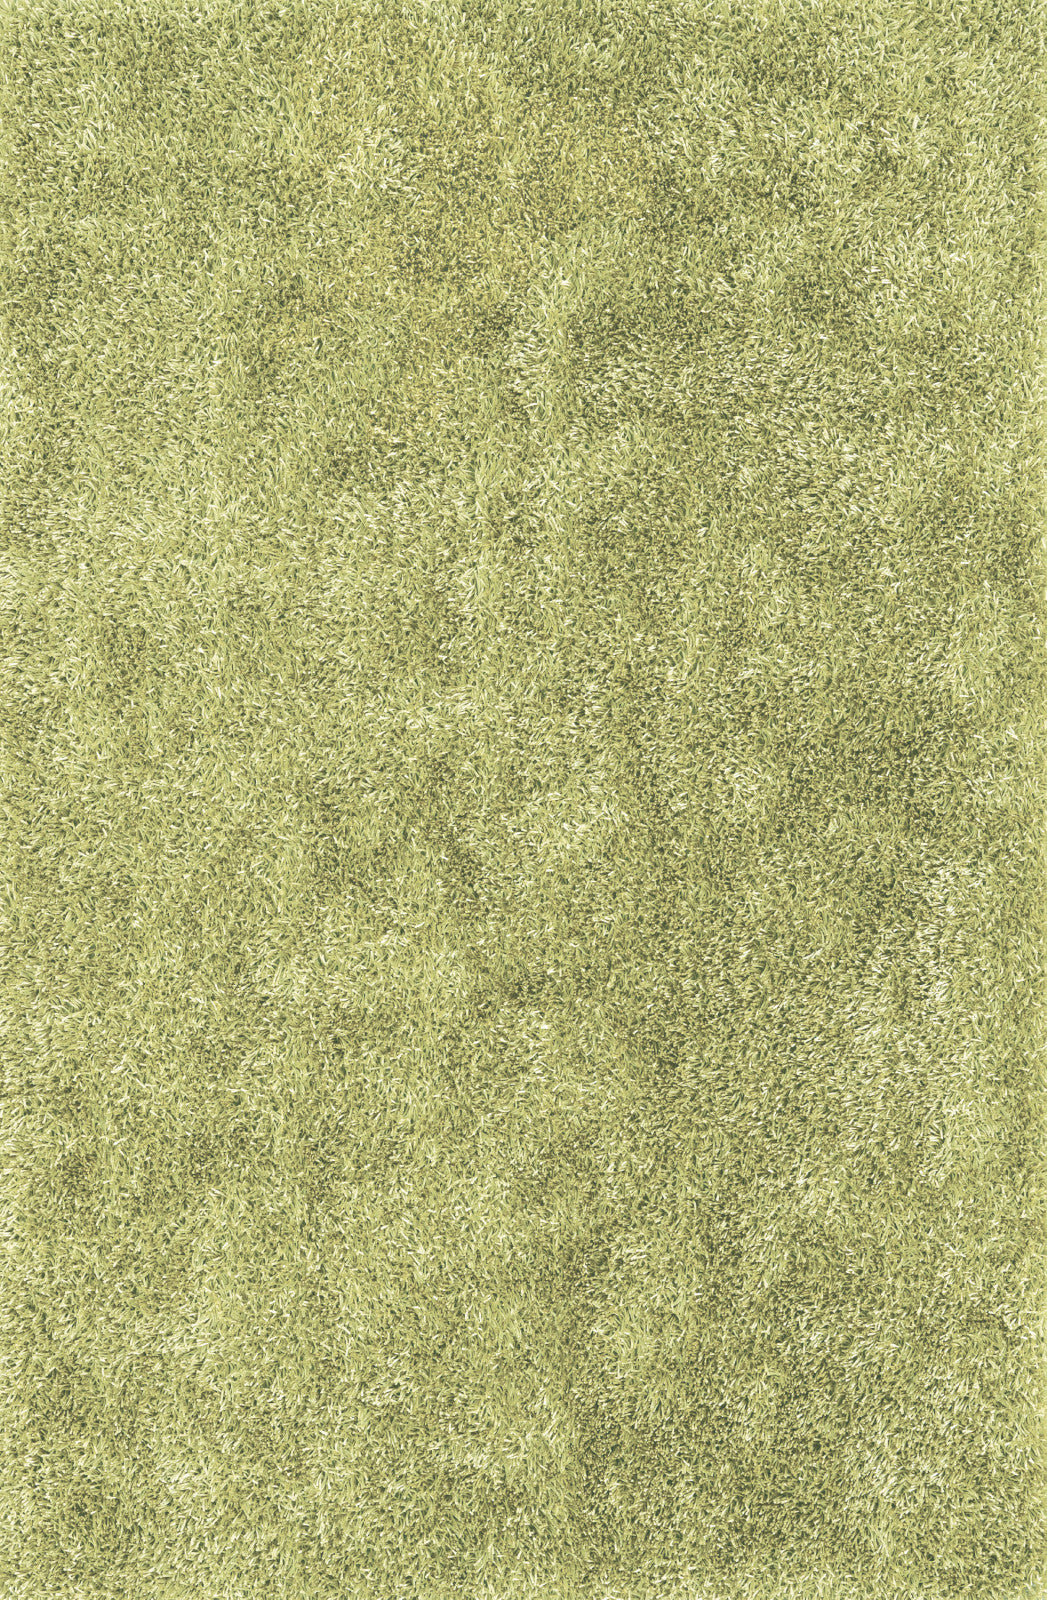 Dalyn Illusions IL69 Willow Area Rug main image